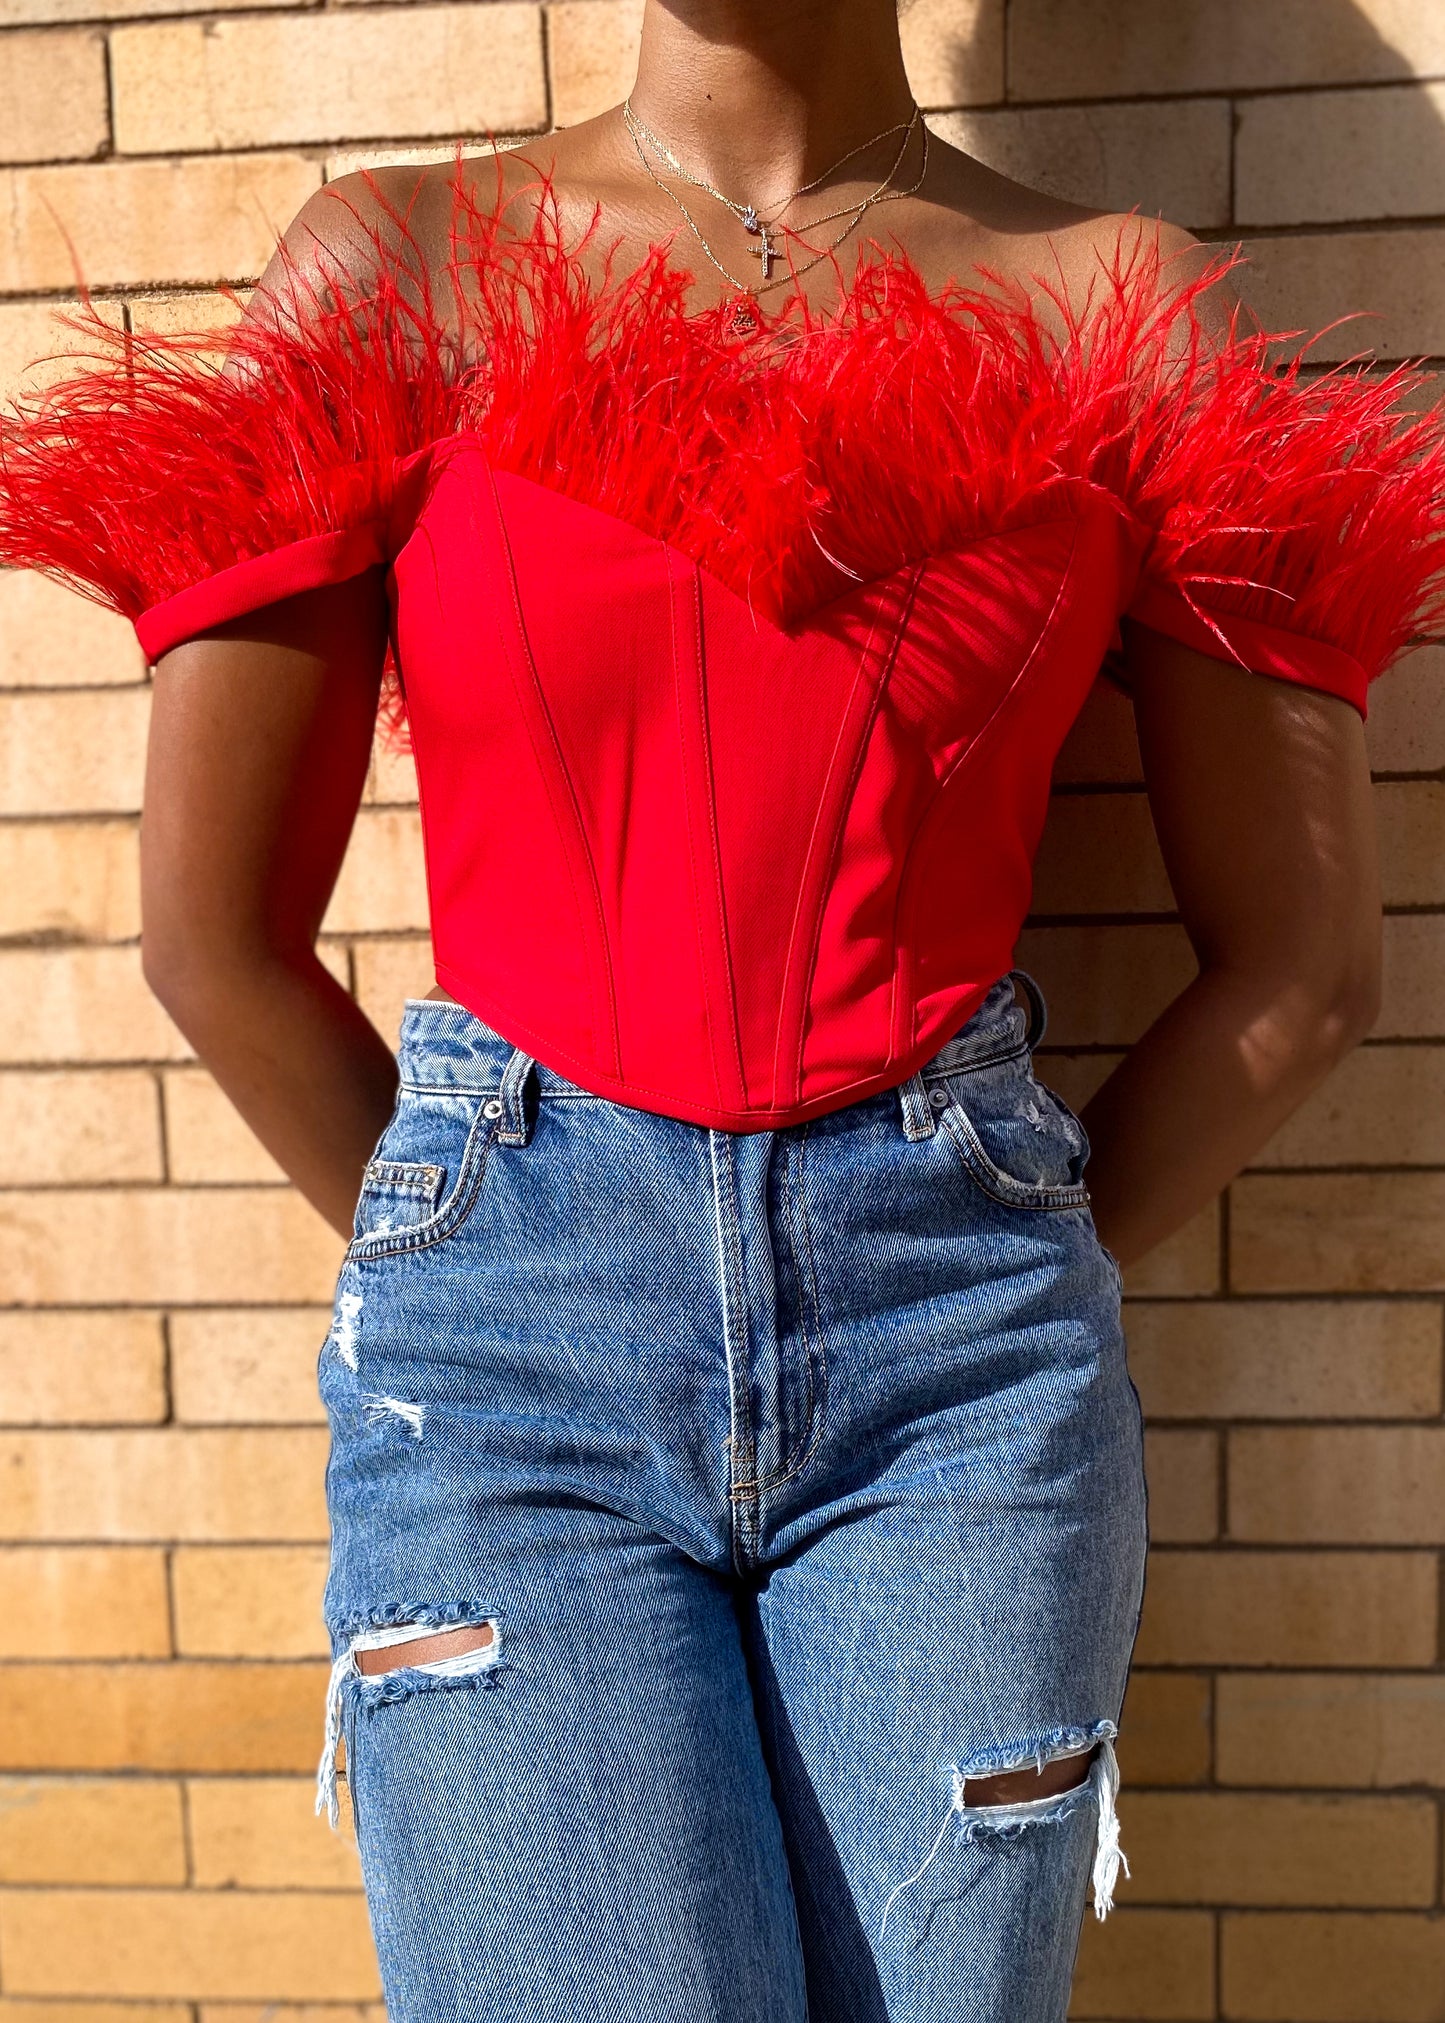 Scarlet Feather Bustier